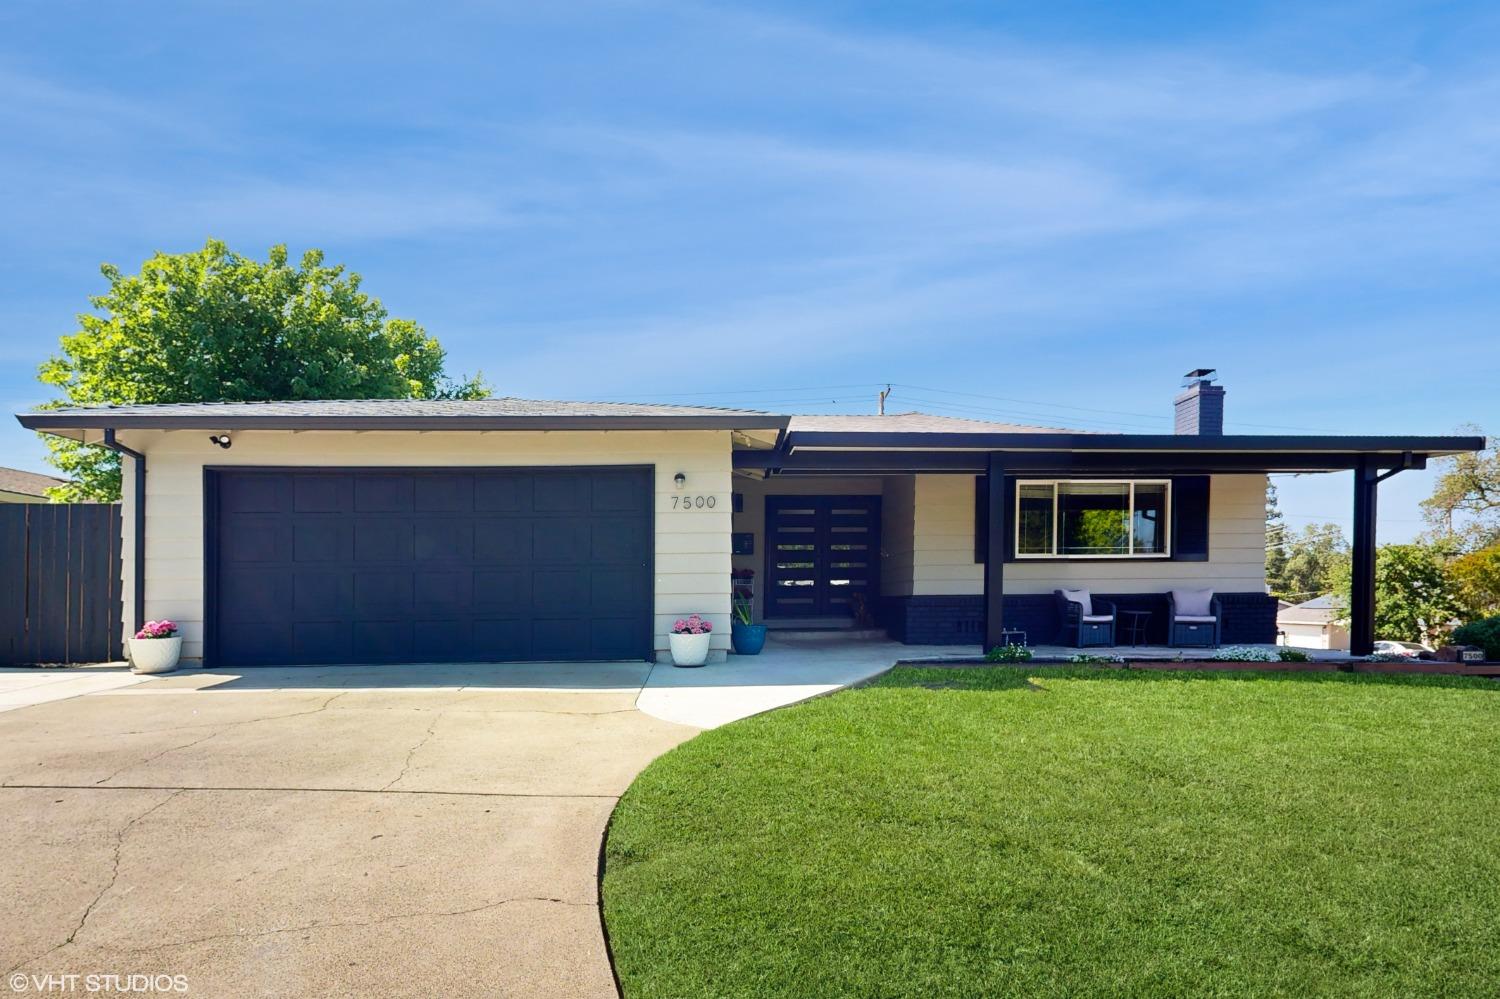 Photo of 7500 Eastgate Ave in Citrus Heights, CA